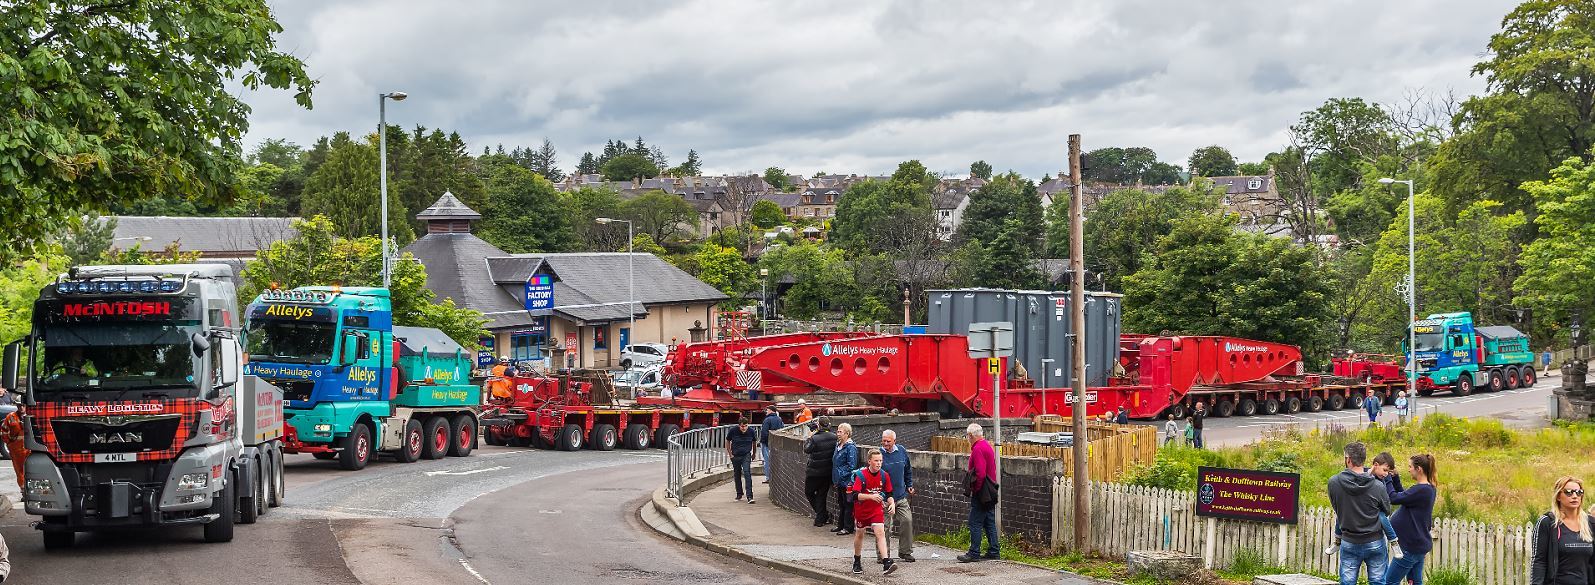 Three trucks were needed to pull the 245 tonne transformer up hills.